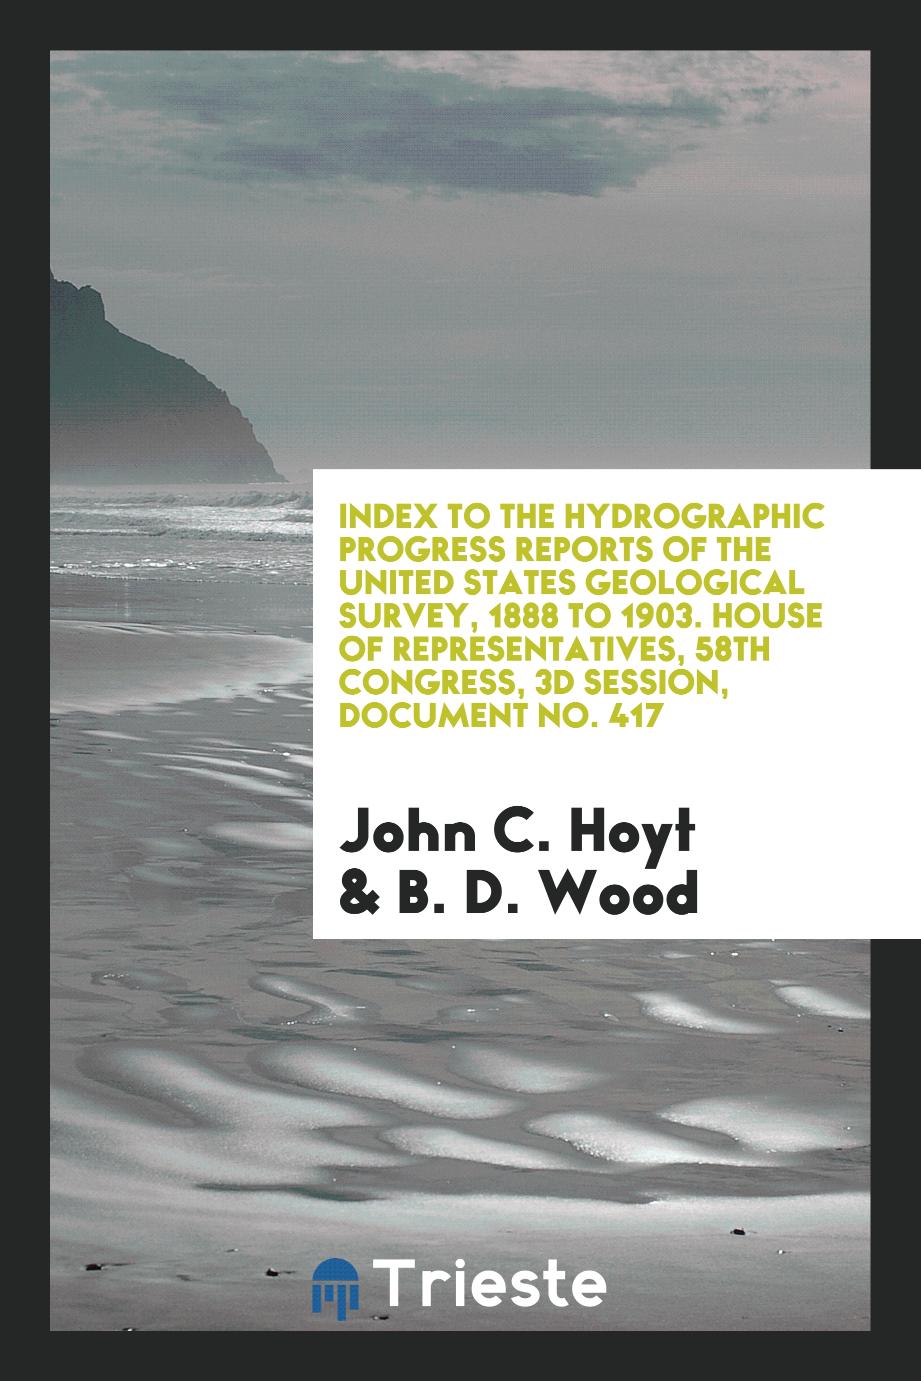 Index to the hydrographic progress reports of the United States Geological survey, 1888 to 1903. House of Representatives, 58th Congress, 3d session, document No. 417